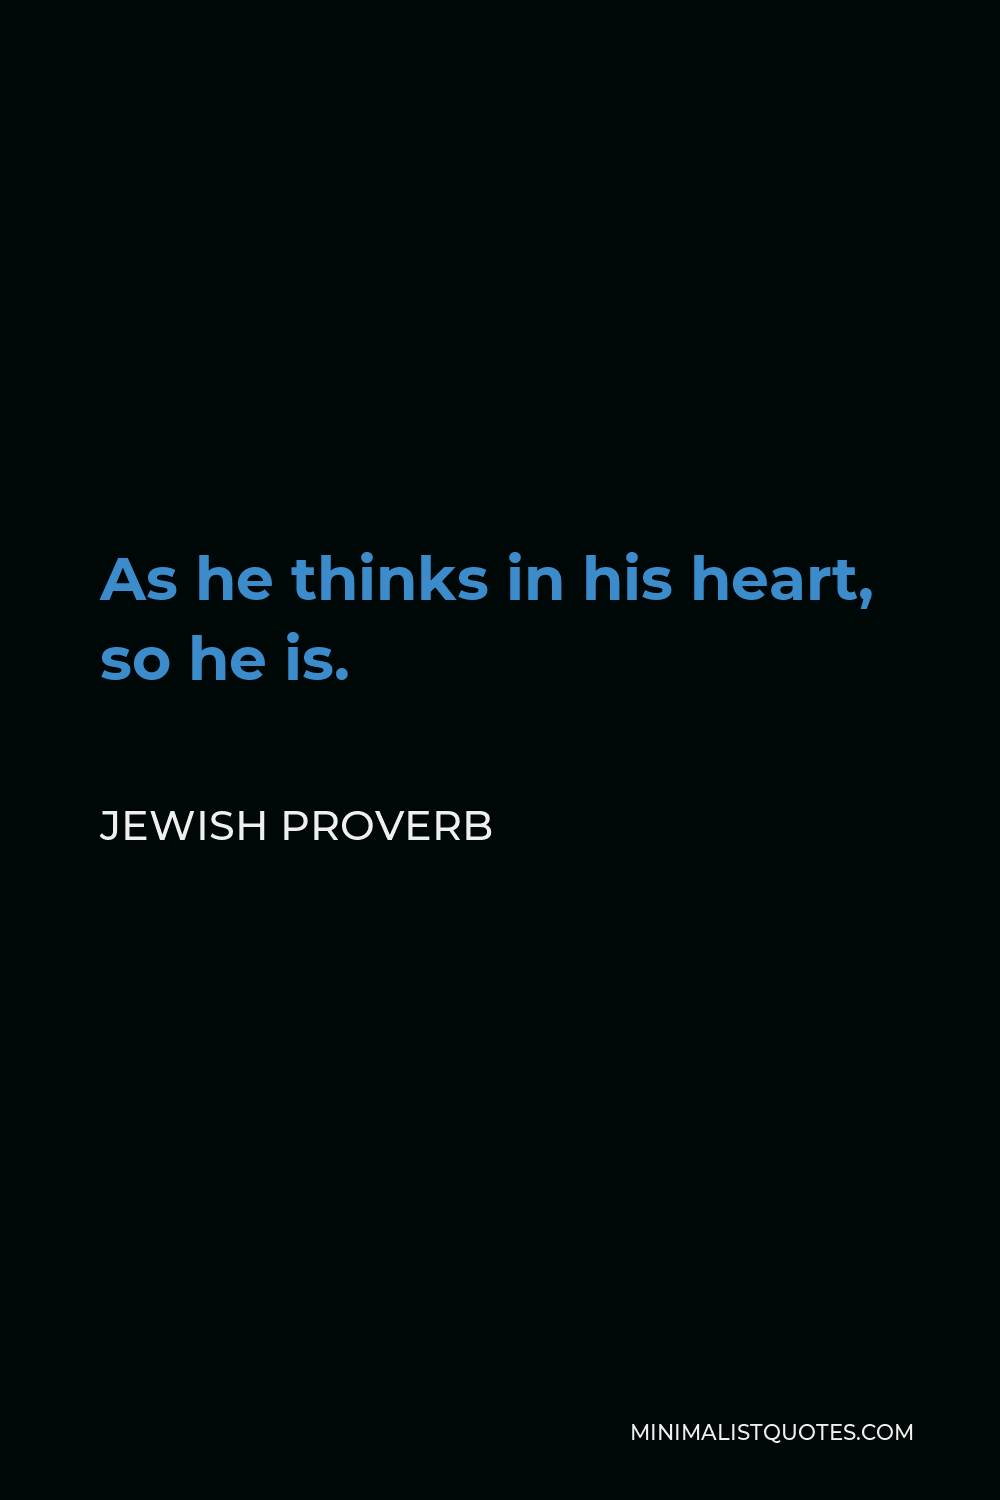 Jewish Proverb Quote - As he thinks in his heart, so he is.